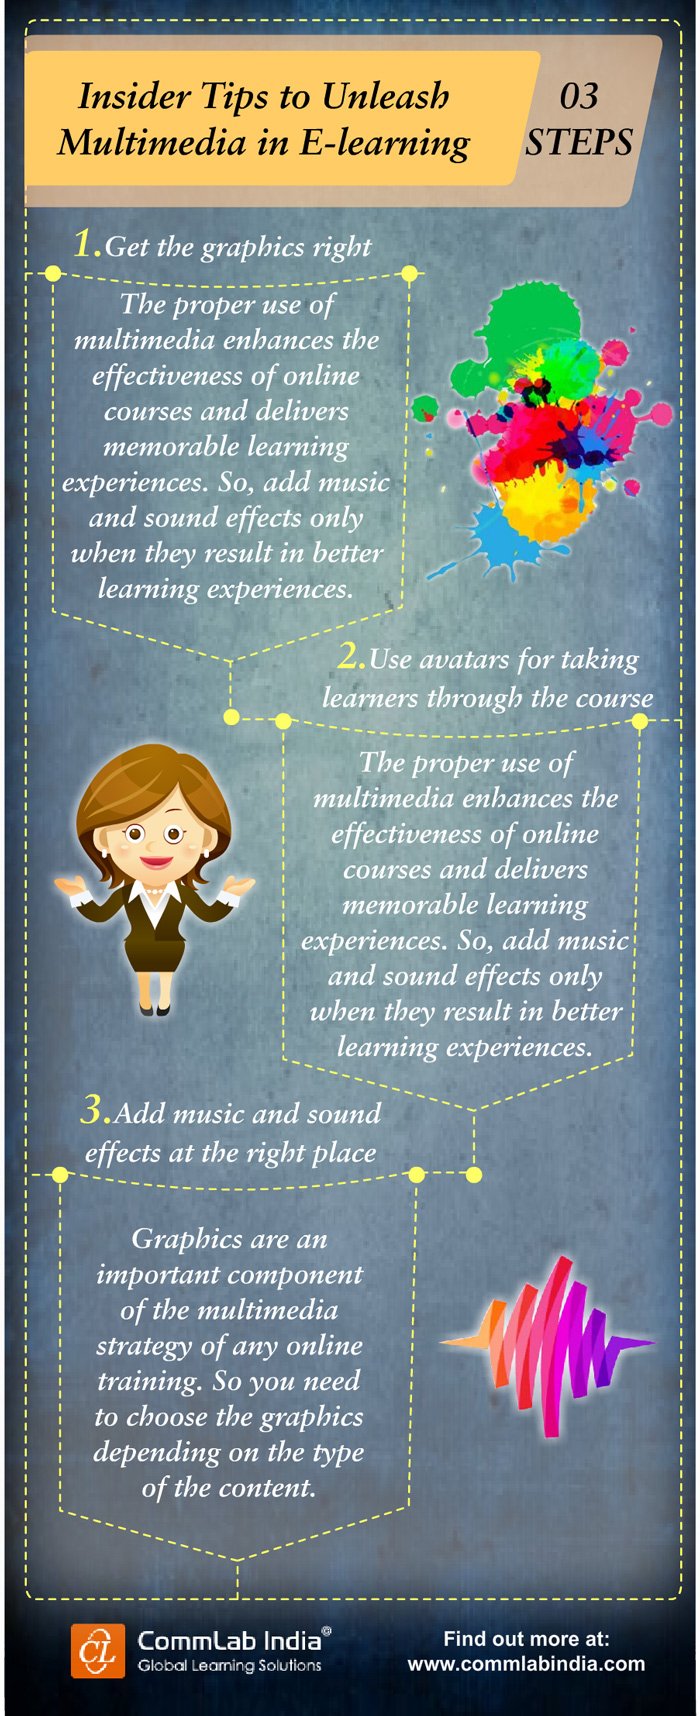 Insider Tips to Unleash Multimedia in E-learning [Infographic]